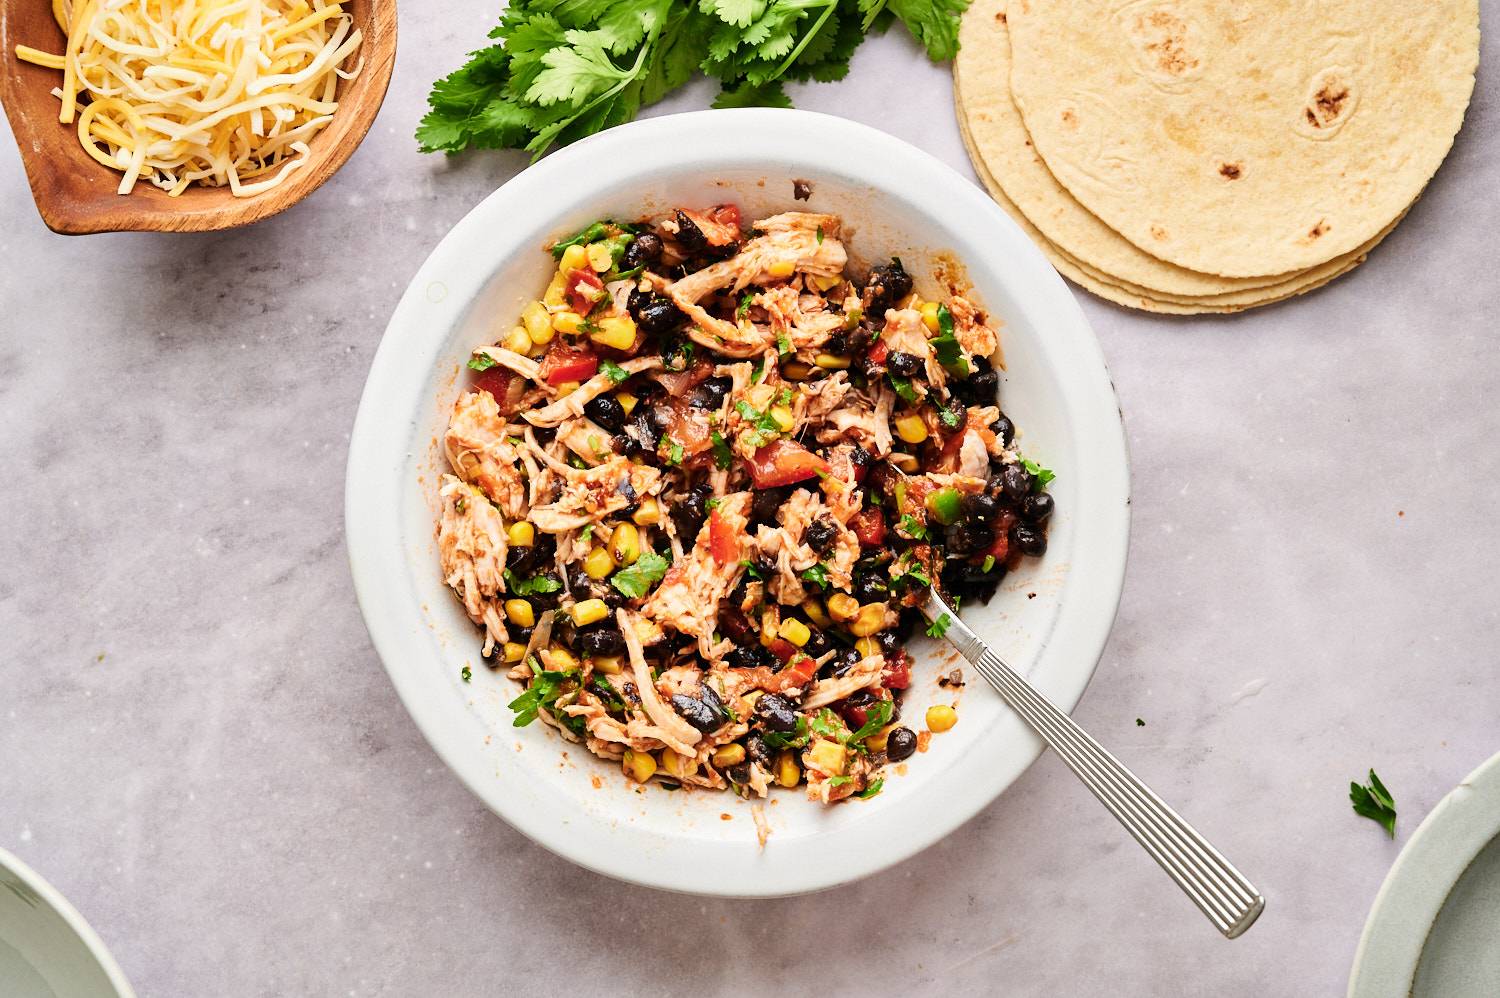 Spicy shredded chicken, black beans, tomatoes, corn, and tomatoes in a bowl for quesadillas.